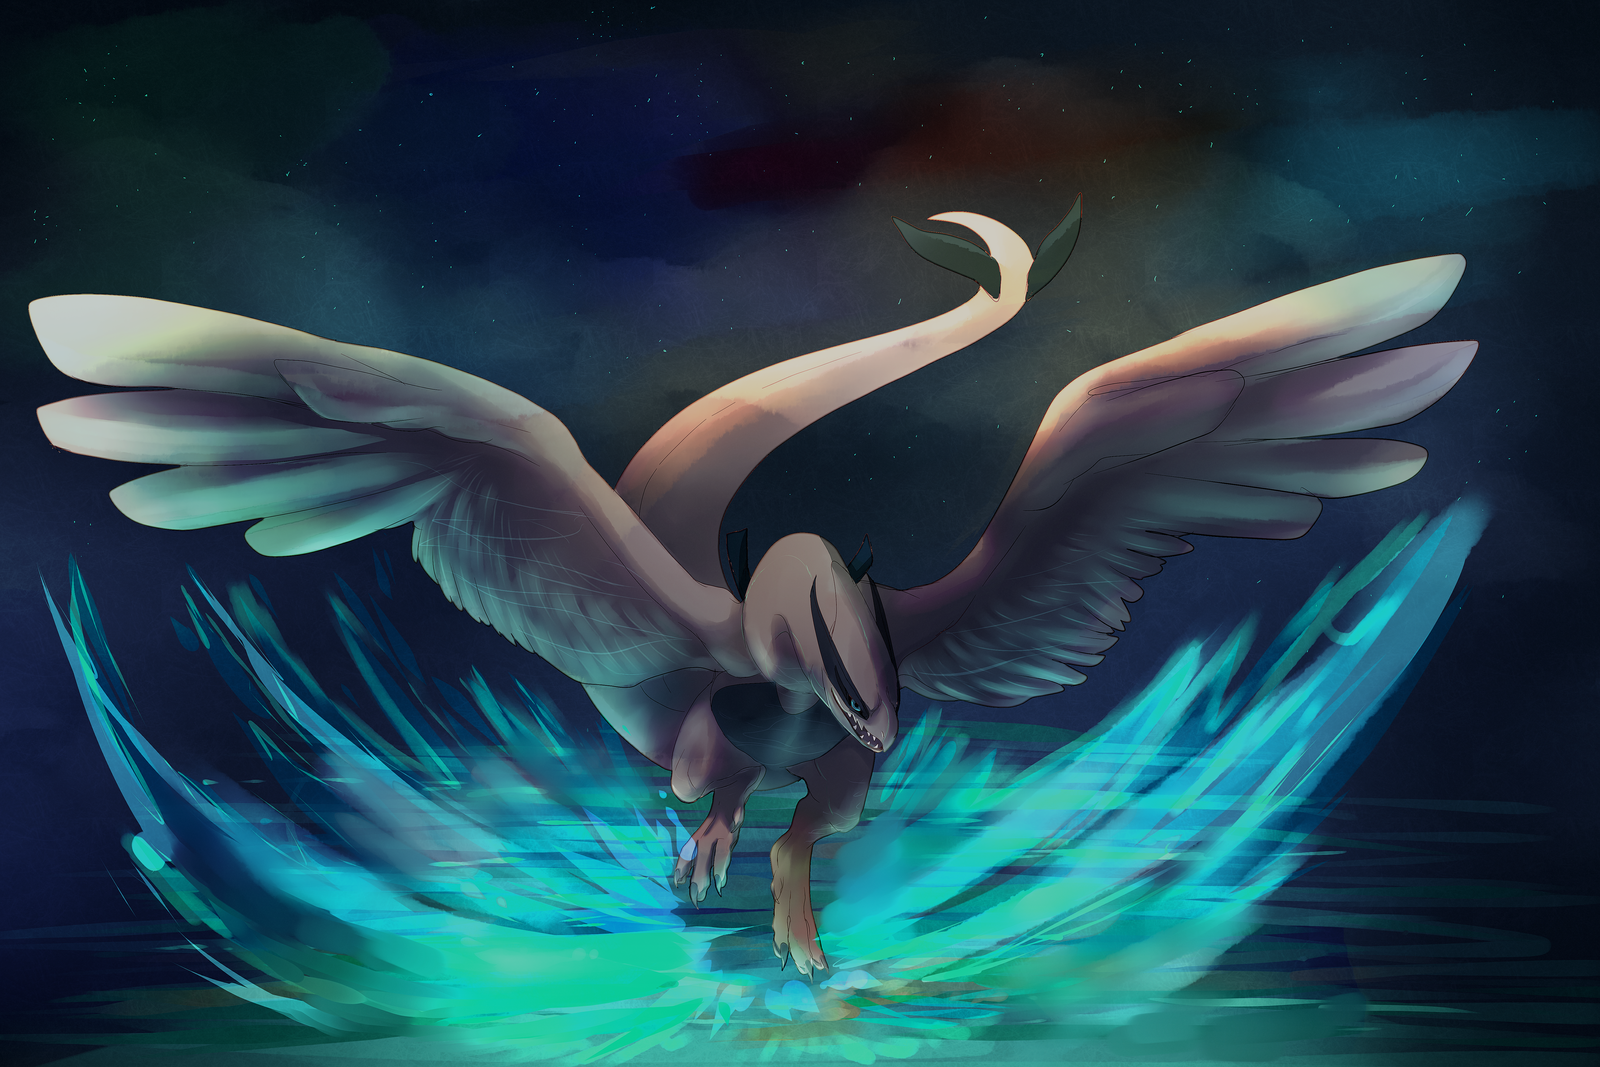 lugia_by_cafemellowdays-d5nvsoa.png